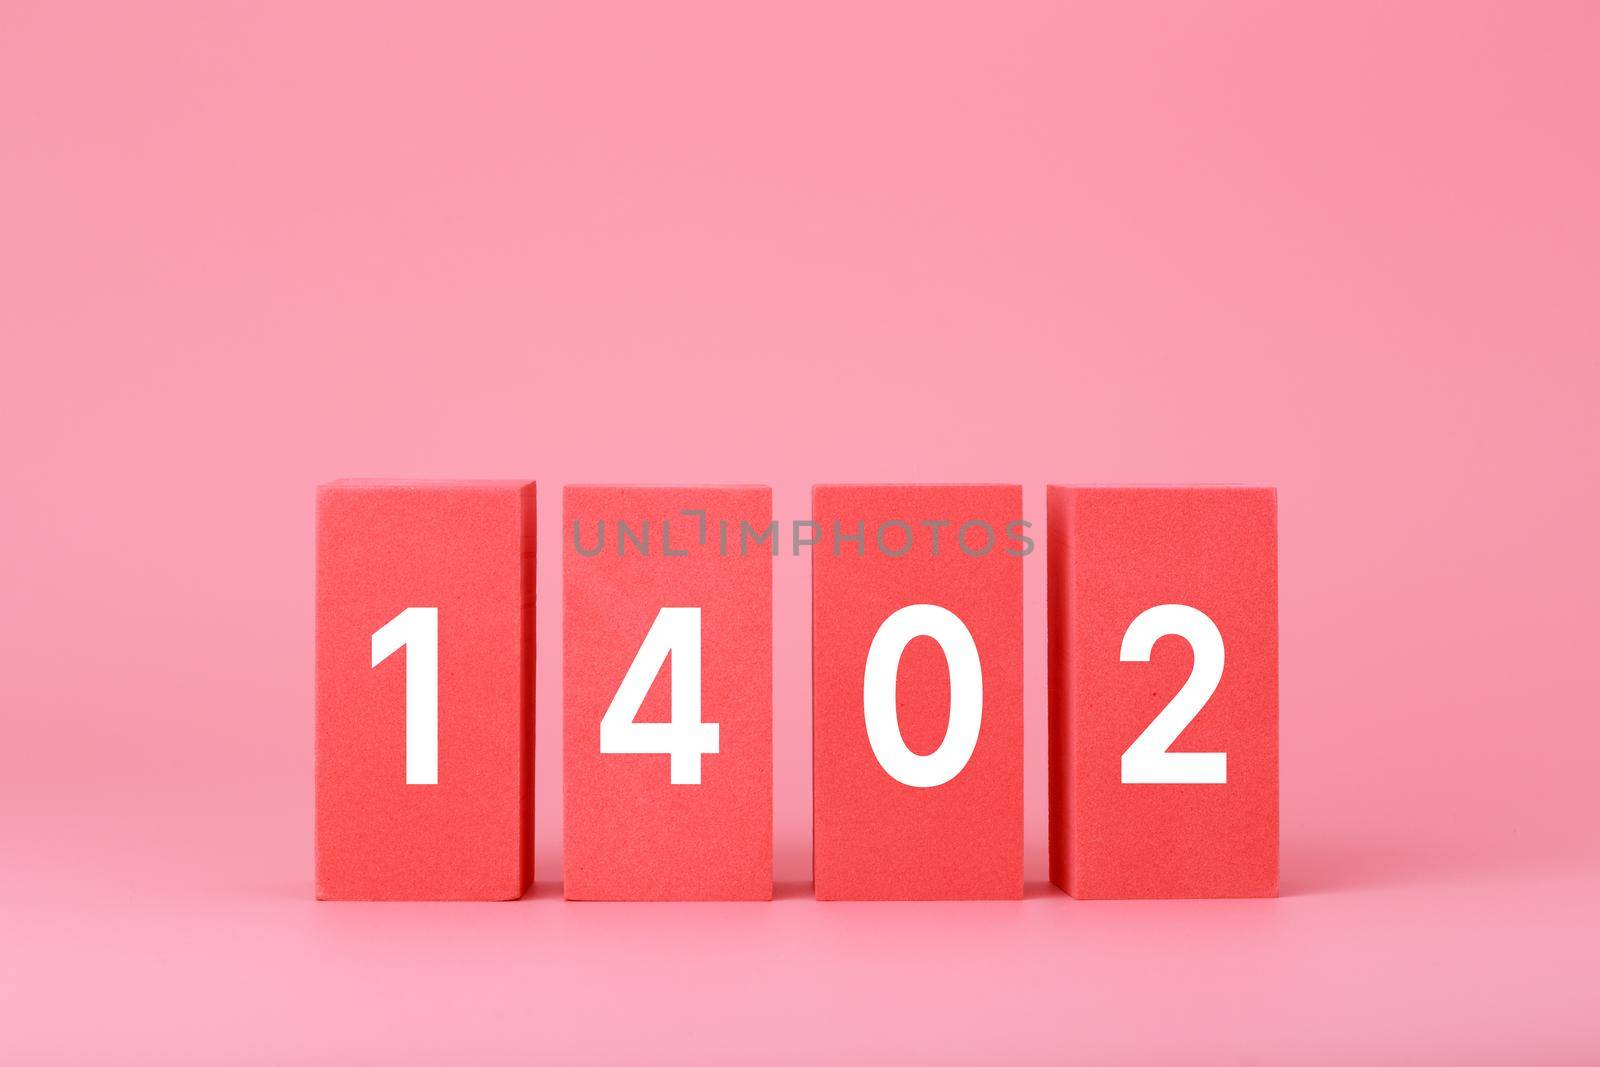 Numbers 14 02 drawn on red rectangles on bright pink background. Concept of Happy Valentine's day by Senorina_Irina